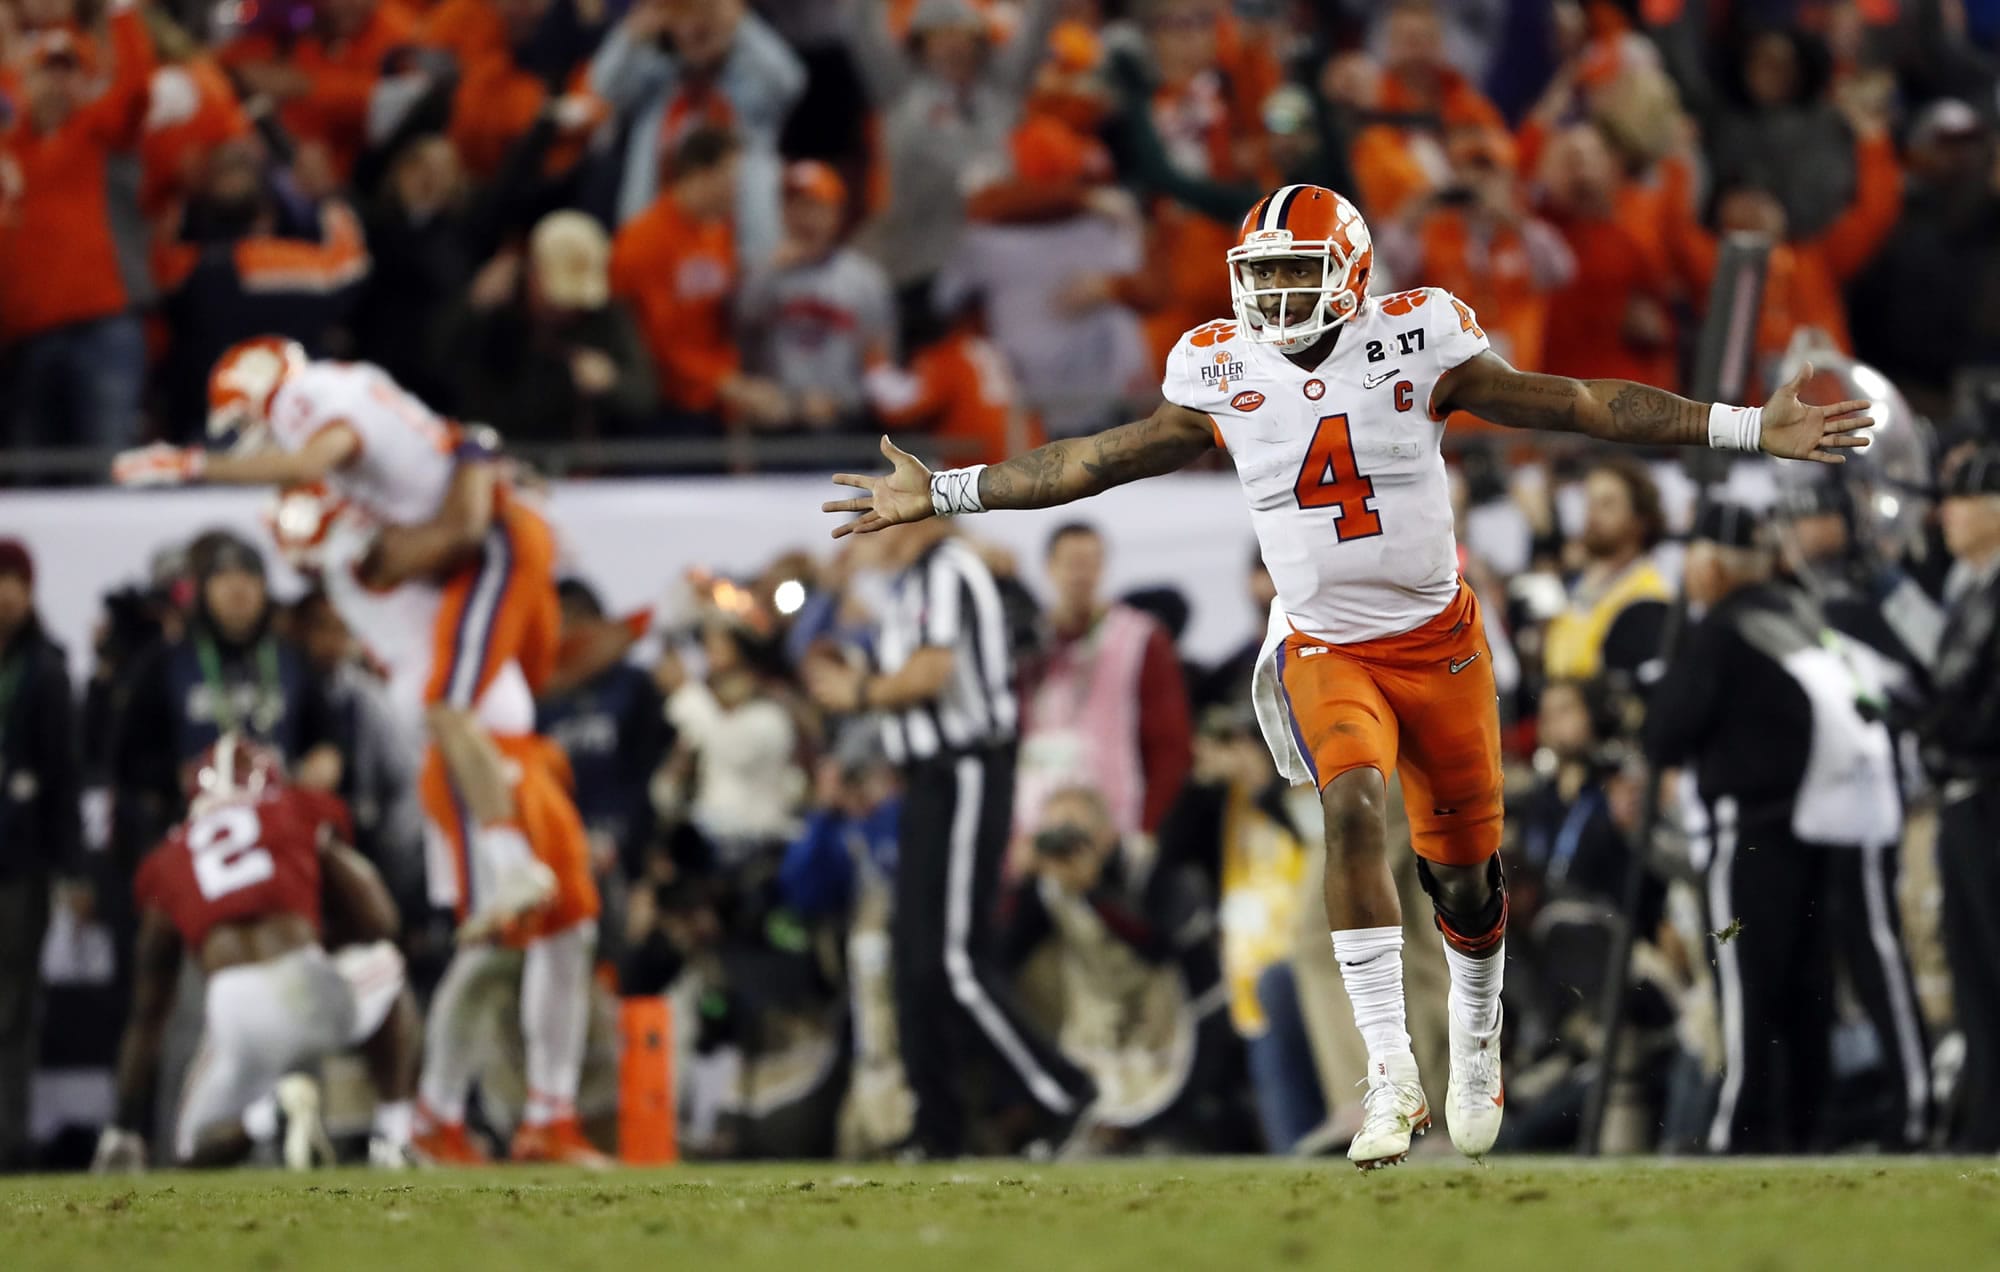 Clemson's Deshaun Watson celebrates a last second touchdown pass to Hunter Renfrow during the second half of the NCAA college football playoff championship game against Alabama Tuesday, Jan. 10, 2017, in Tampa, Fla.